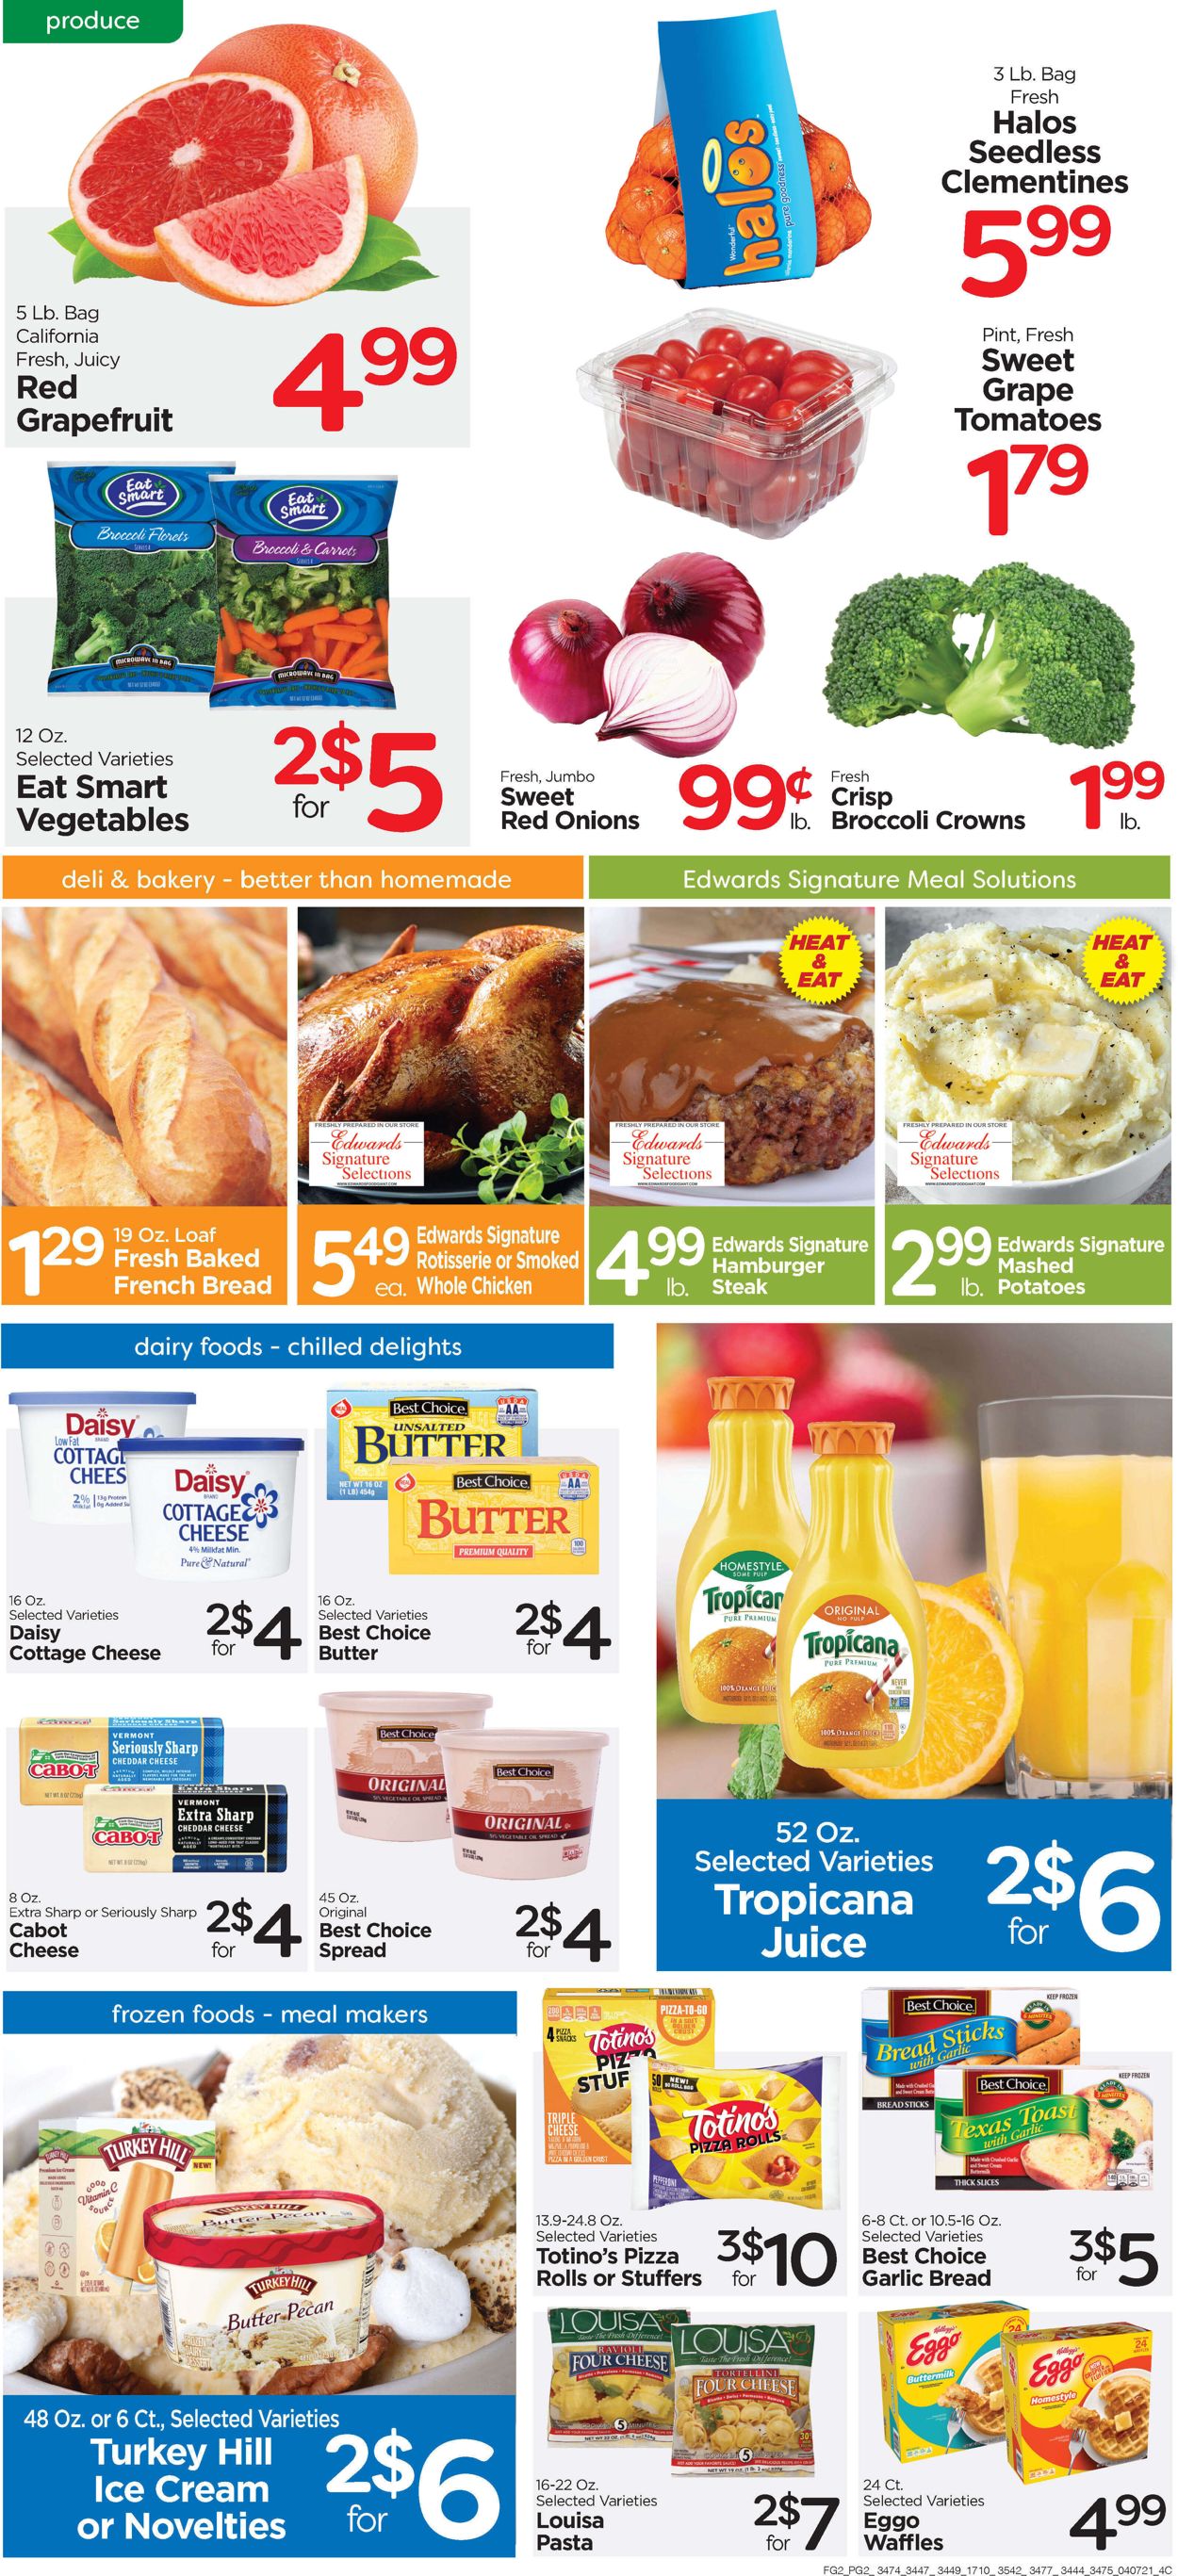 Catalogue Edwards Food Giant from 04/07/2021